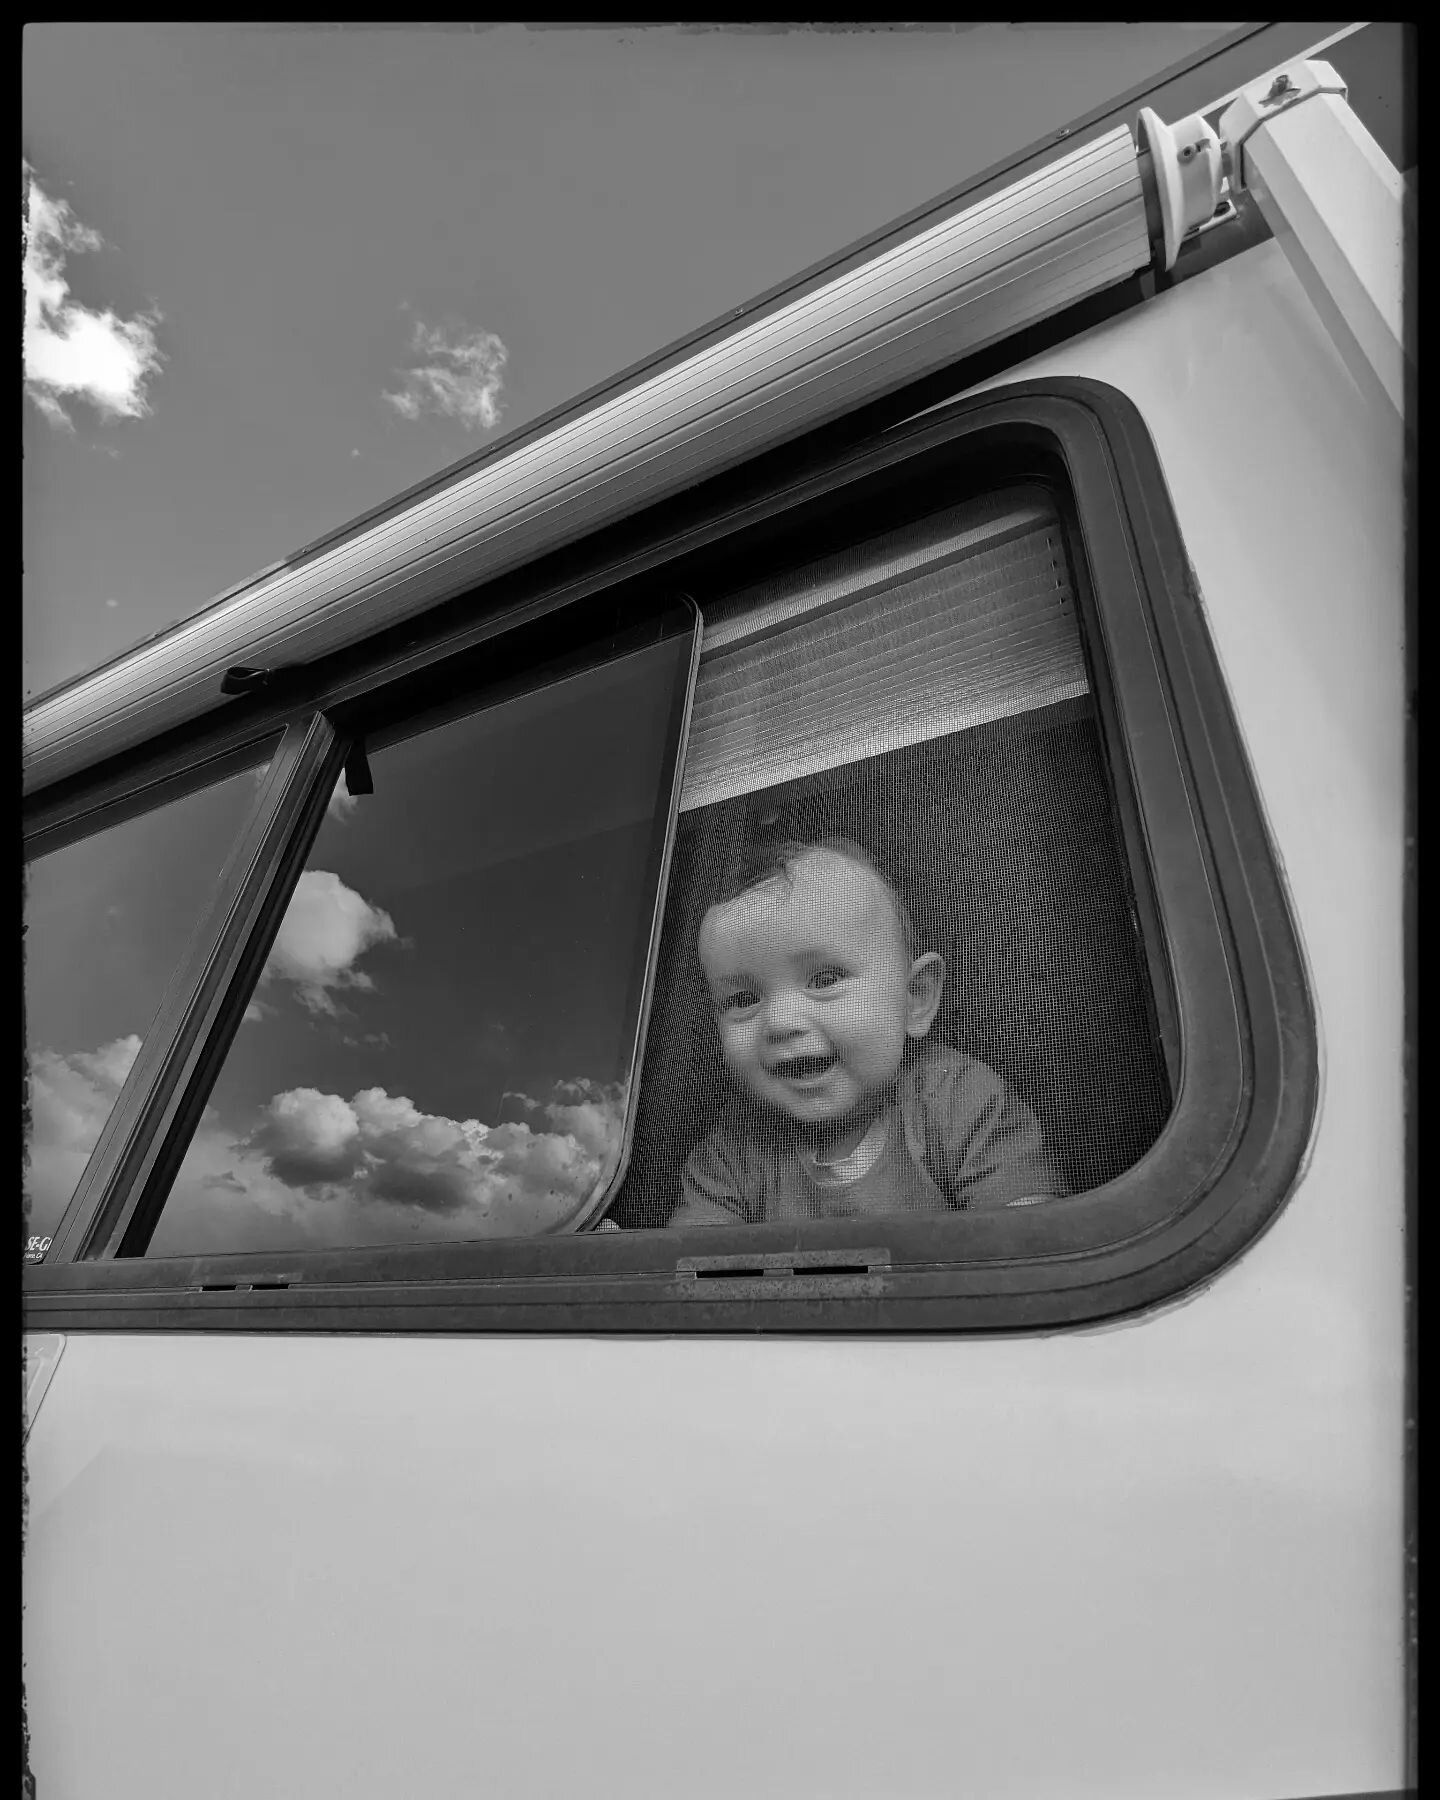 Little #nomadbaby Koa ready for another travel day #rvliving #rvlife #newmexico